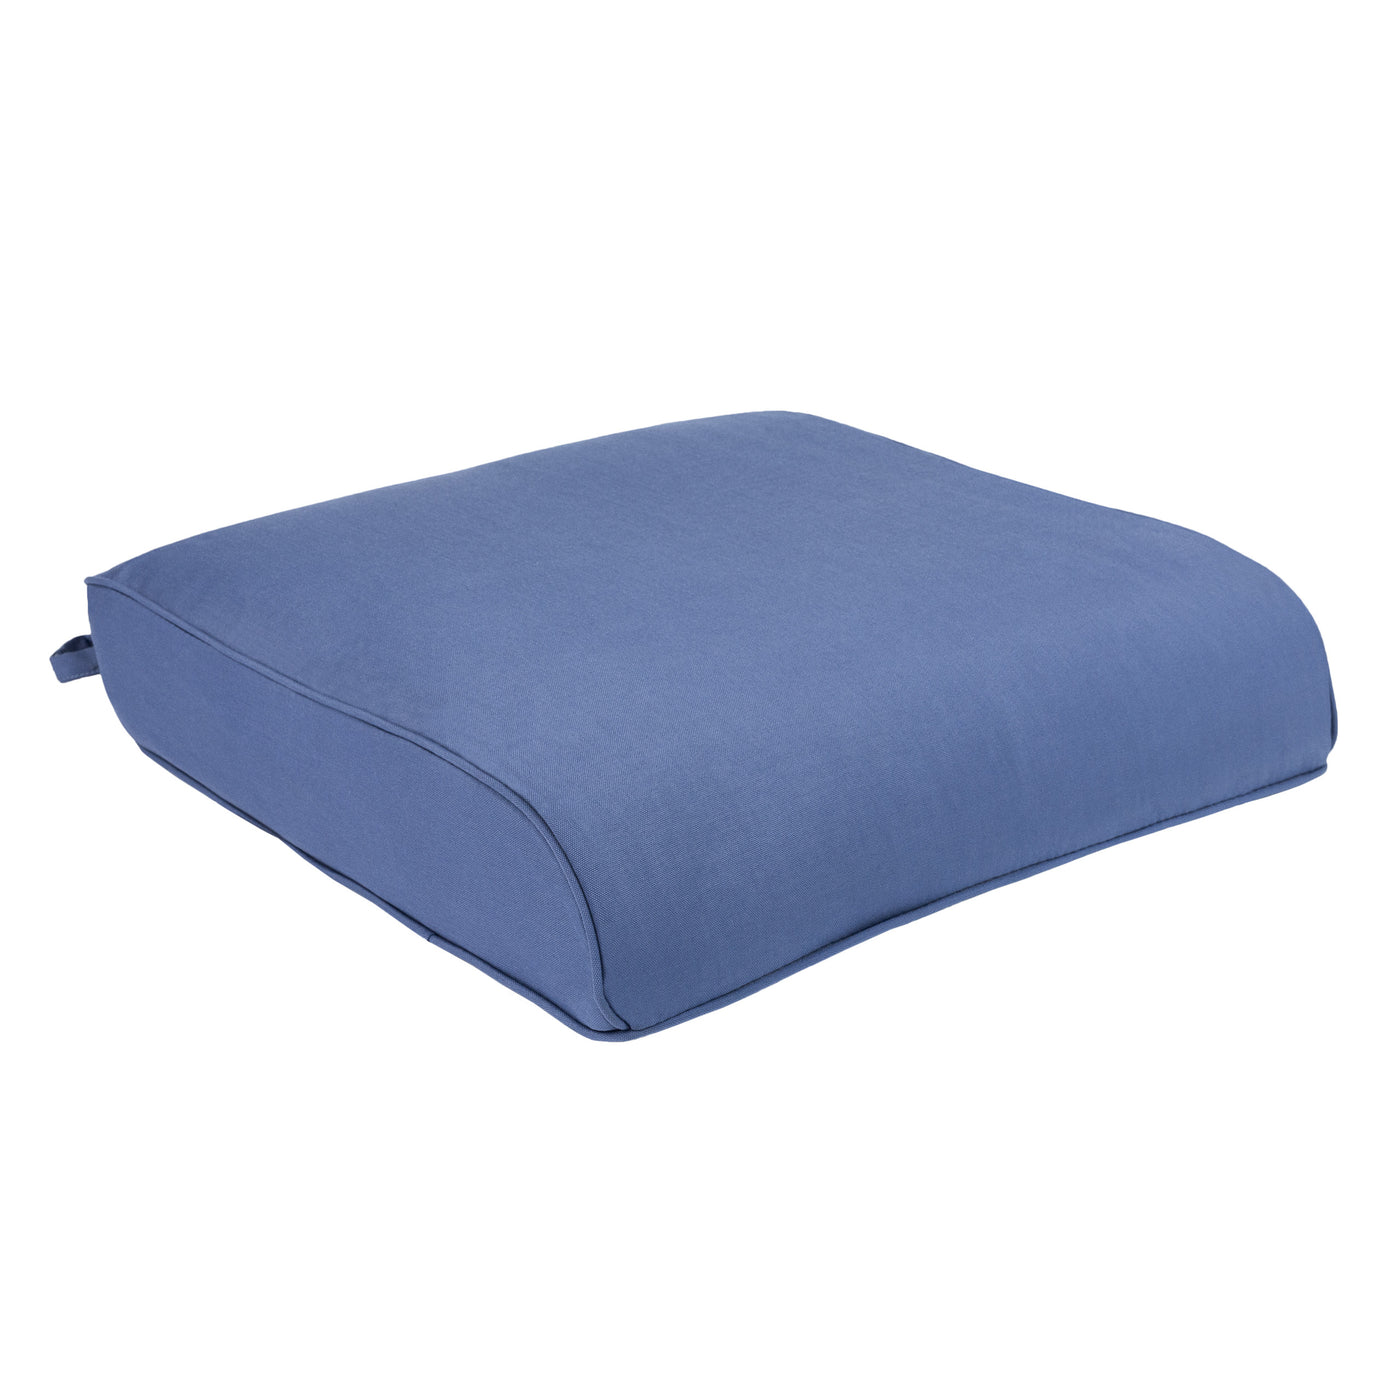 Serenity Seat Cushion Covers, Multiple Colors